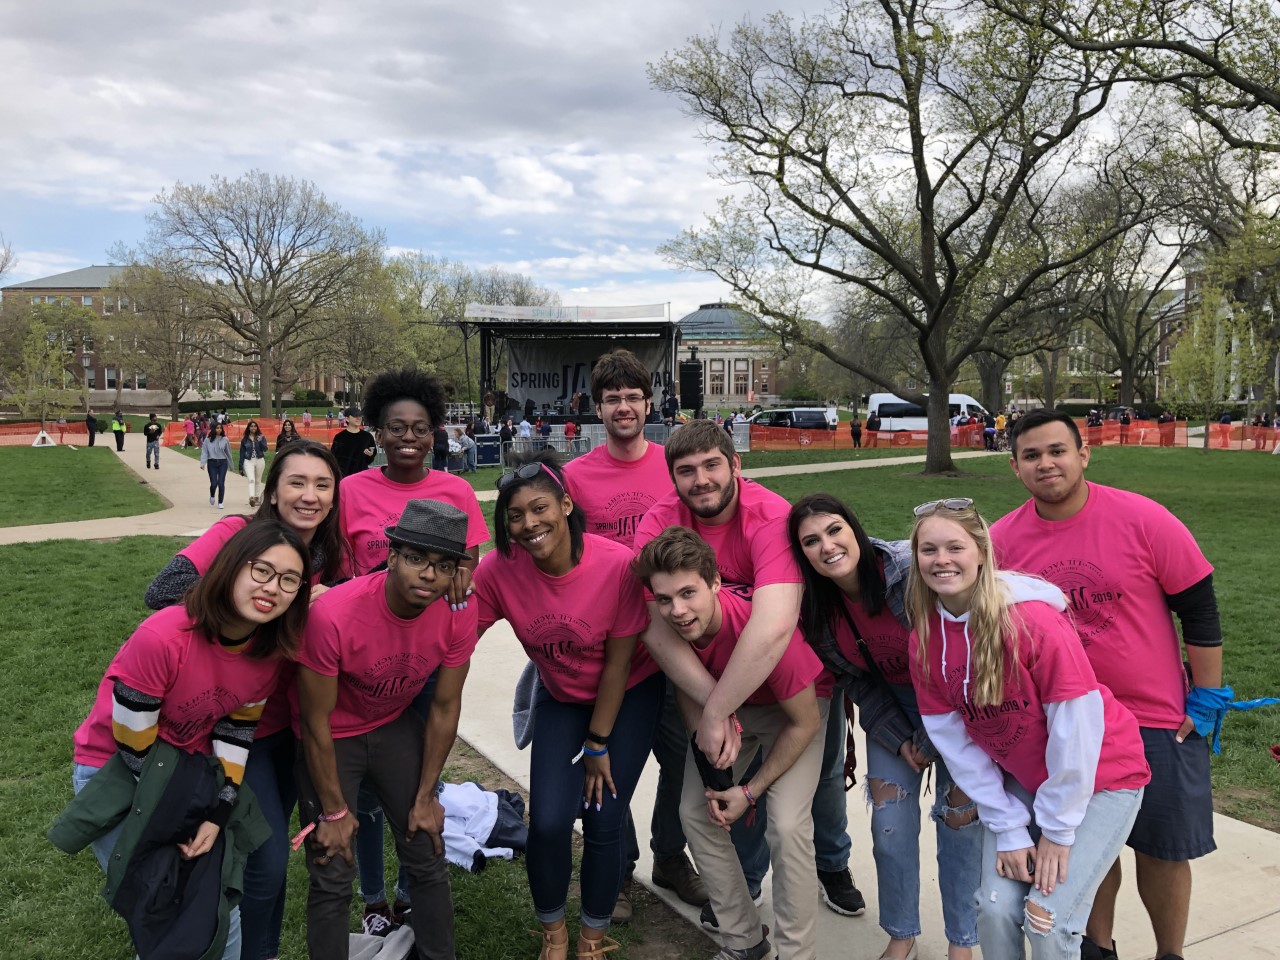 Jessalyn and fellow Illini Union Board members at the 2019 Spring Jam Concert featuring Lil Yachty.